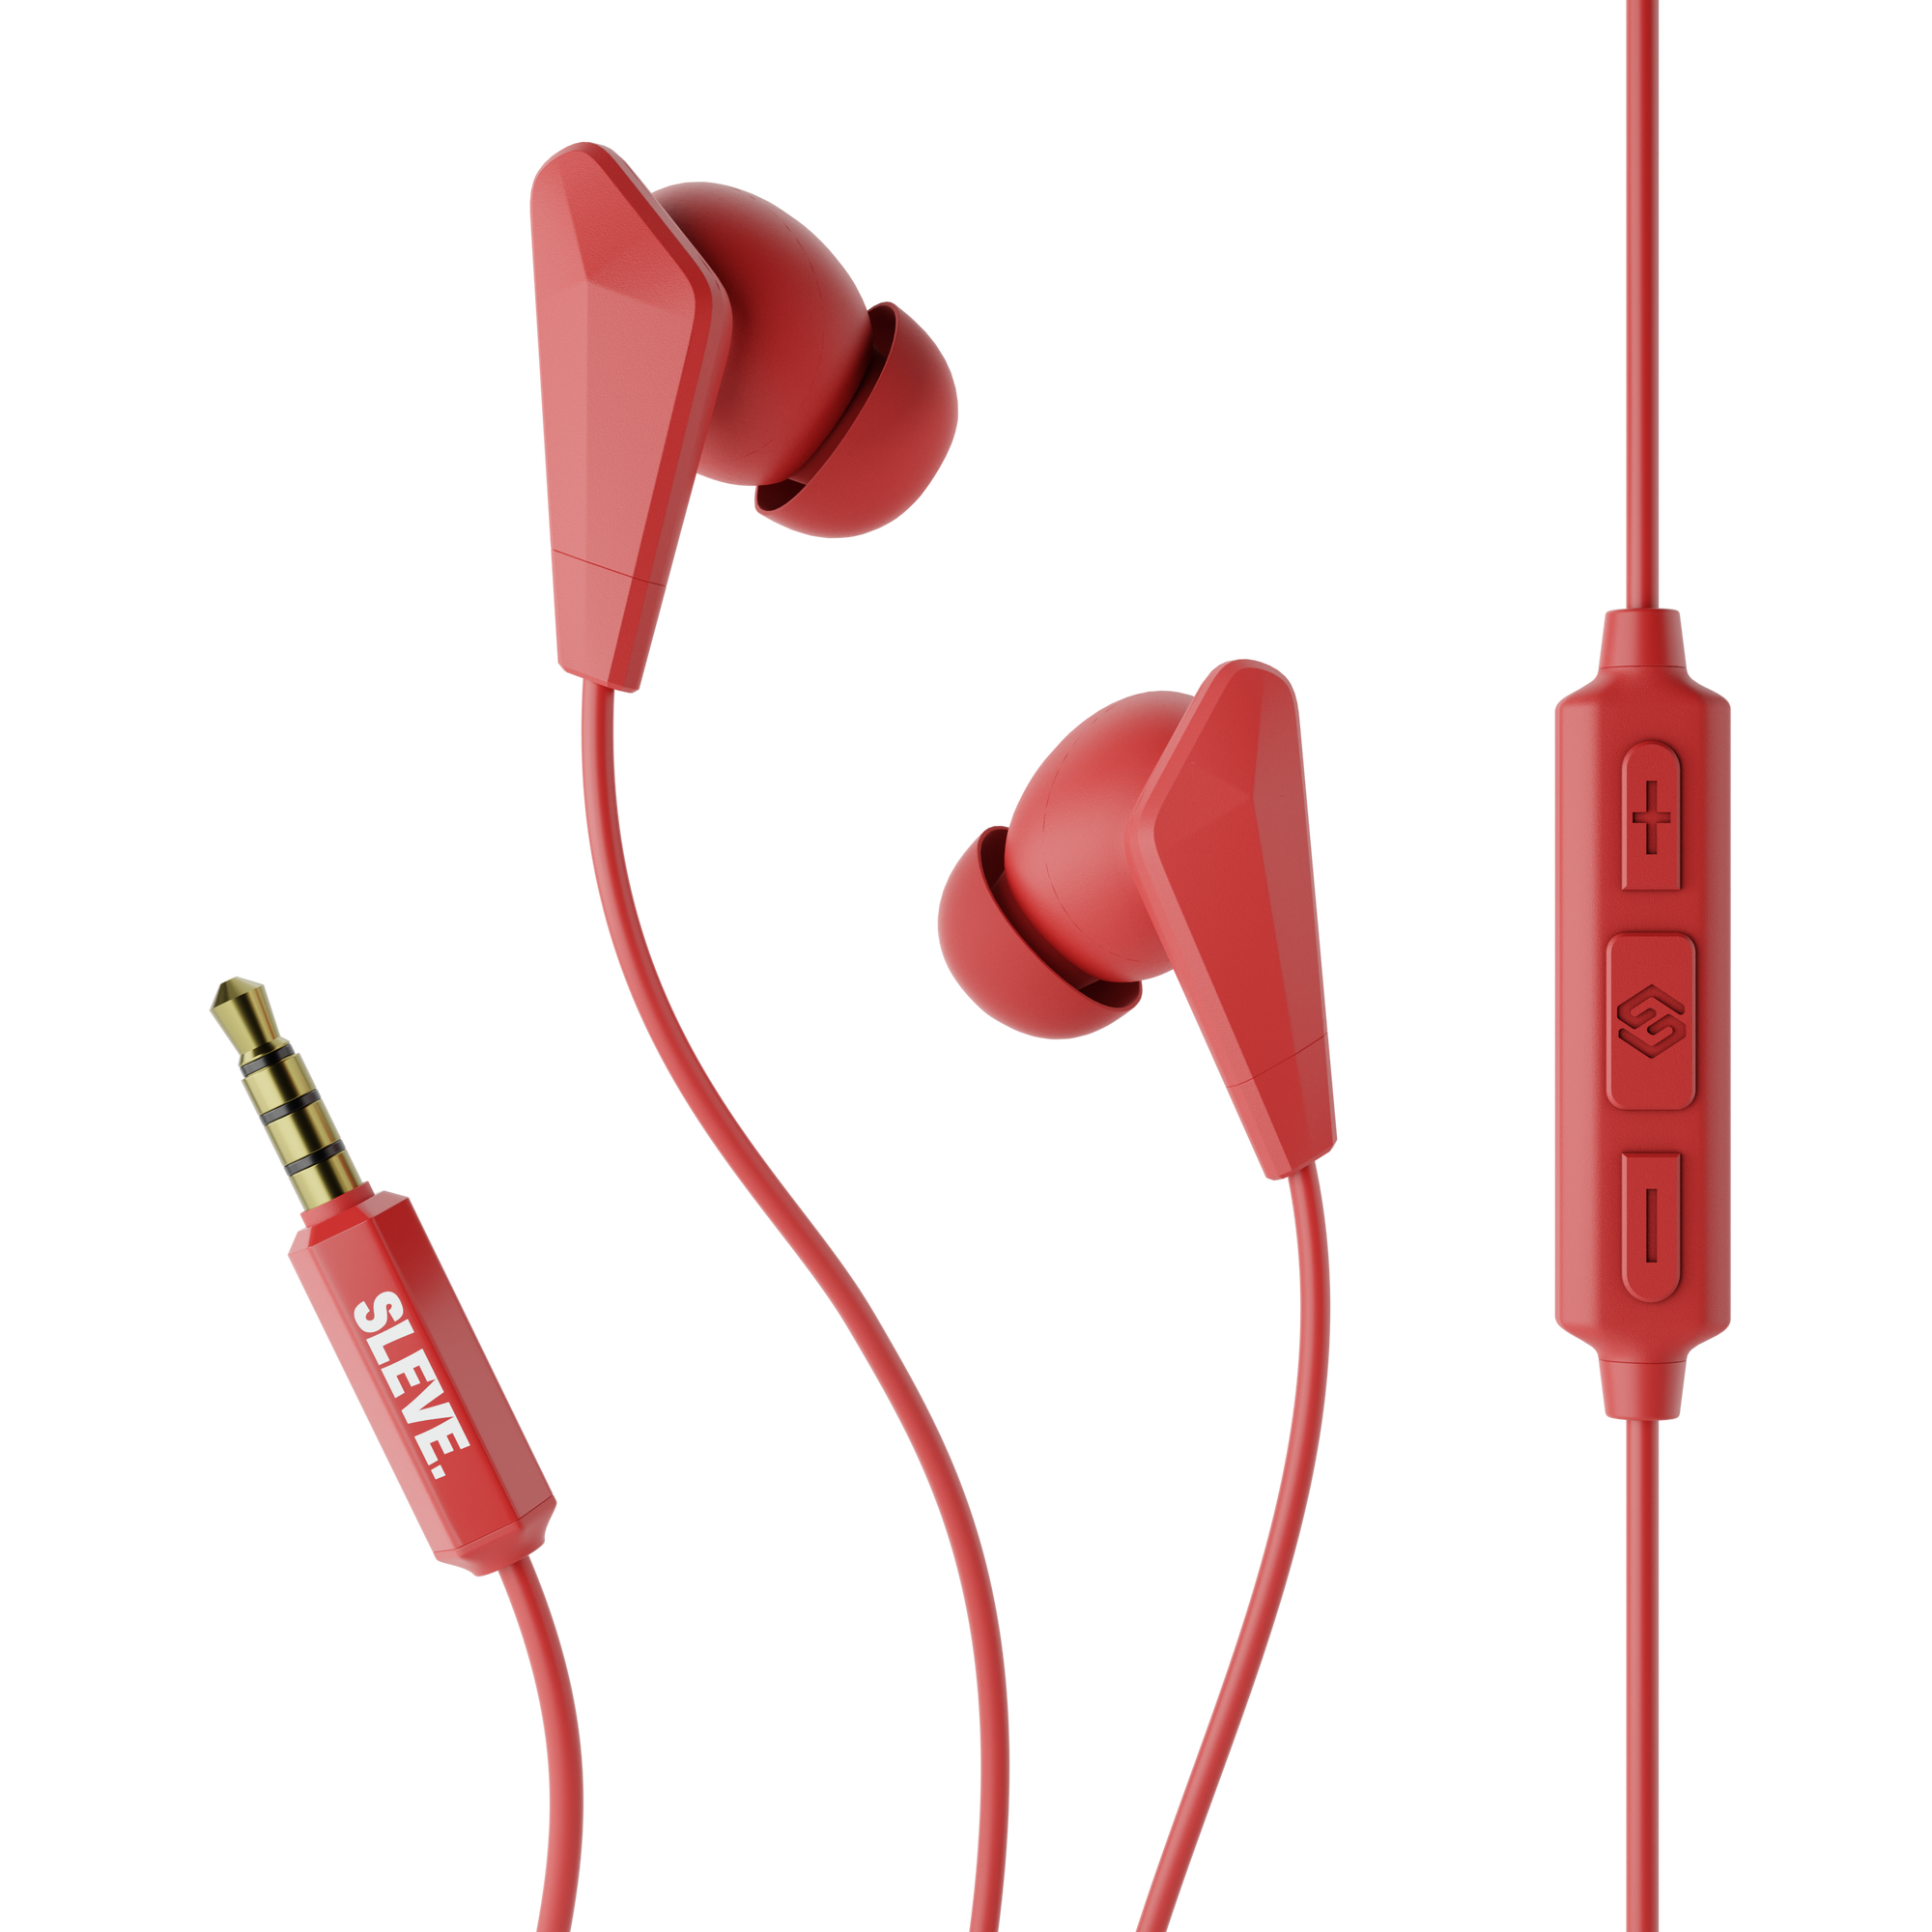 Sleve Epic X Wired Earbuds Red